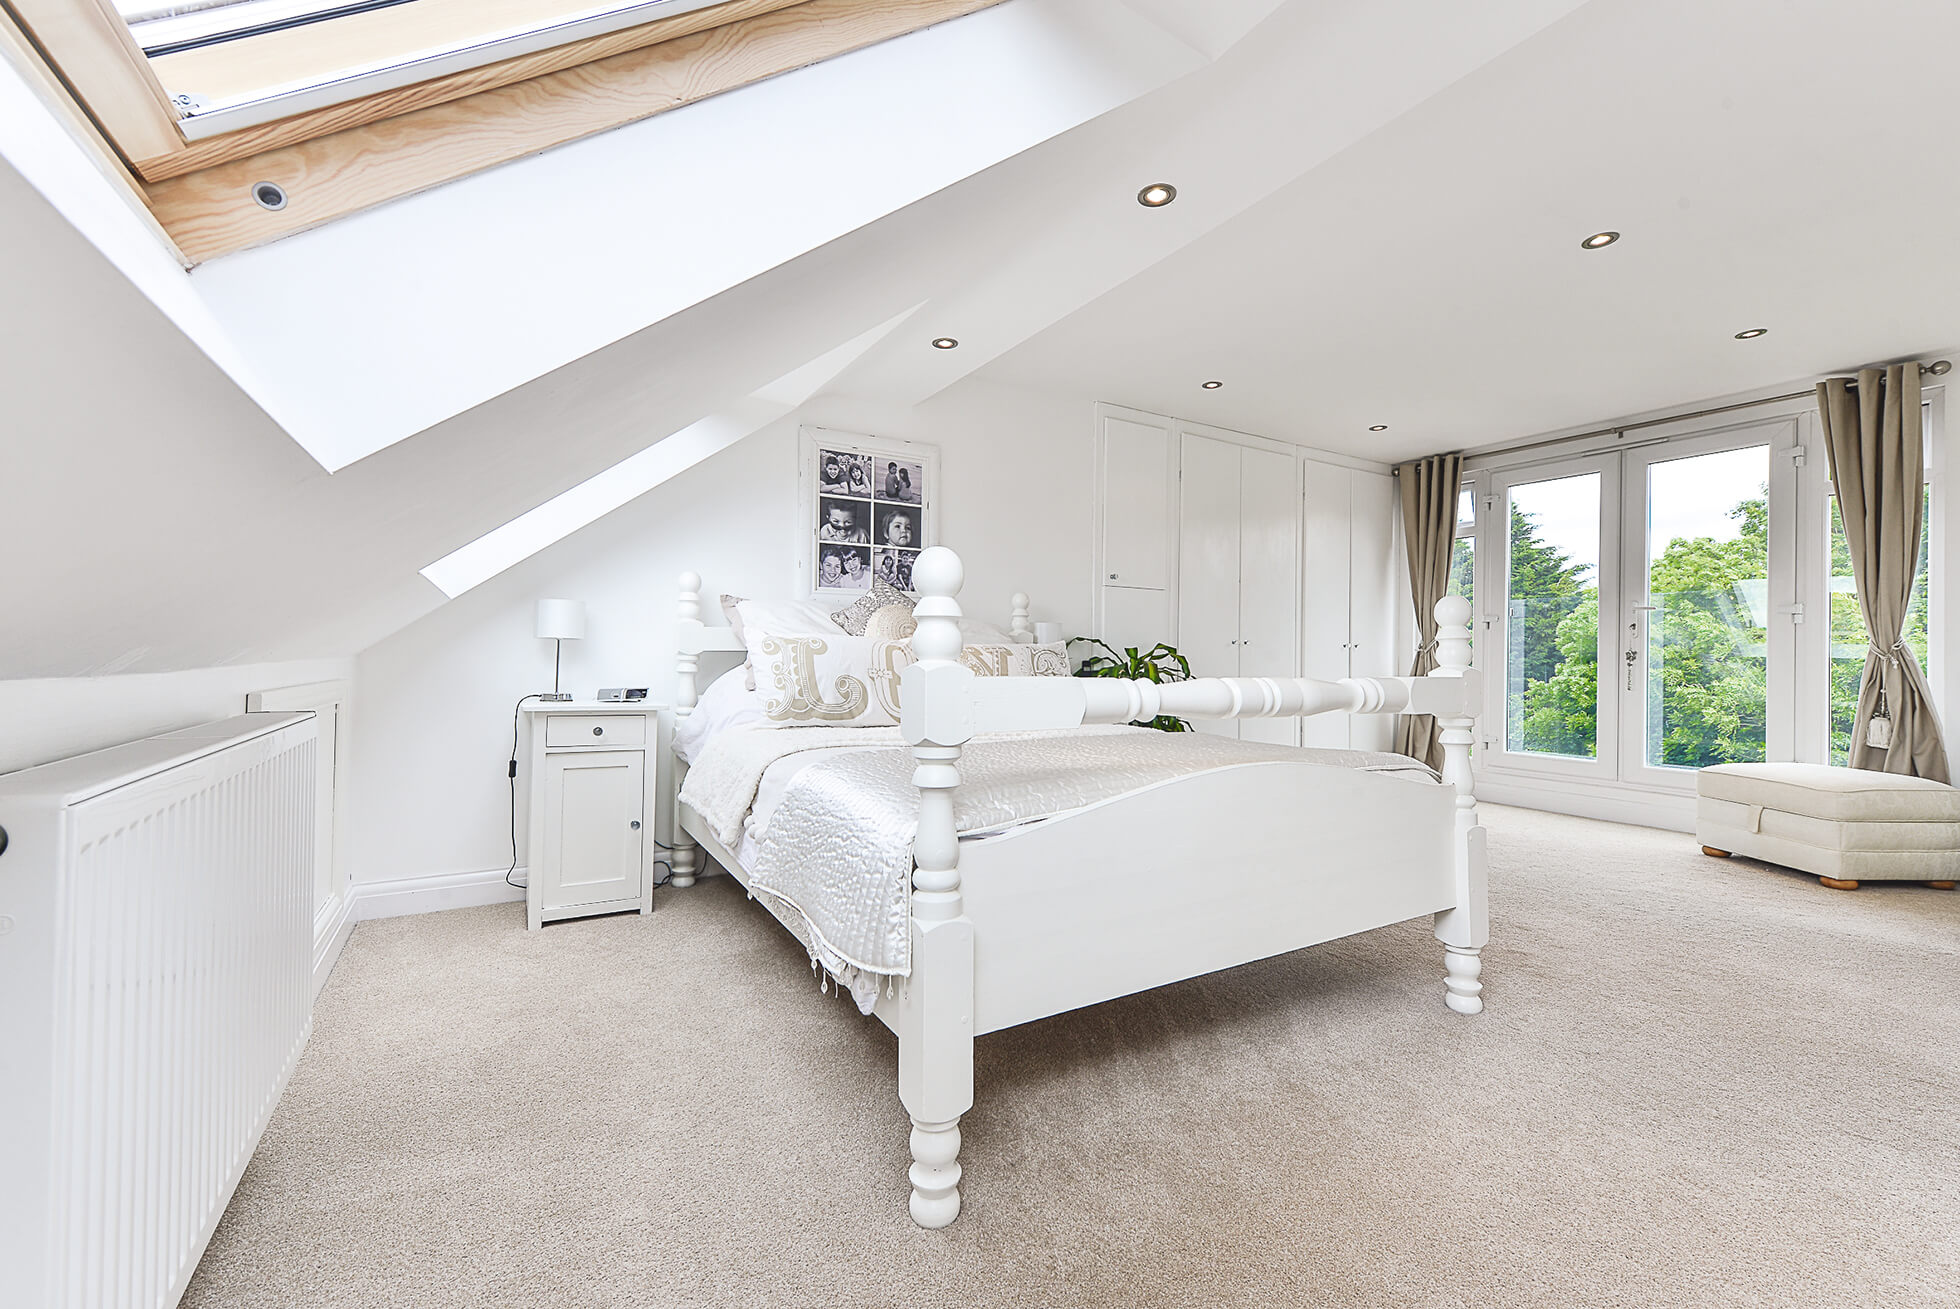 Do you have a question about converting your Loft in Ashridge? Here are the most popular questions asked by our clients.